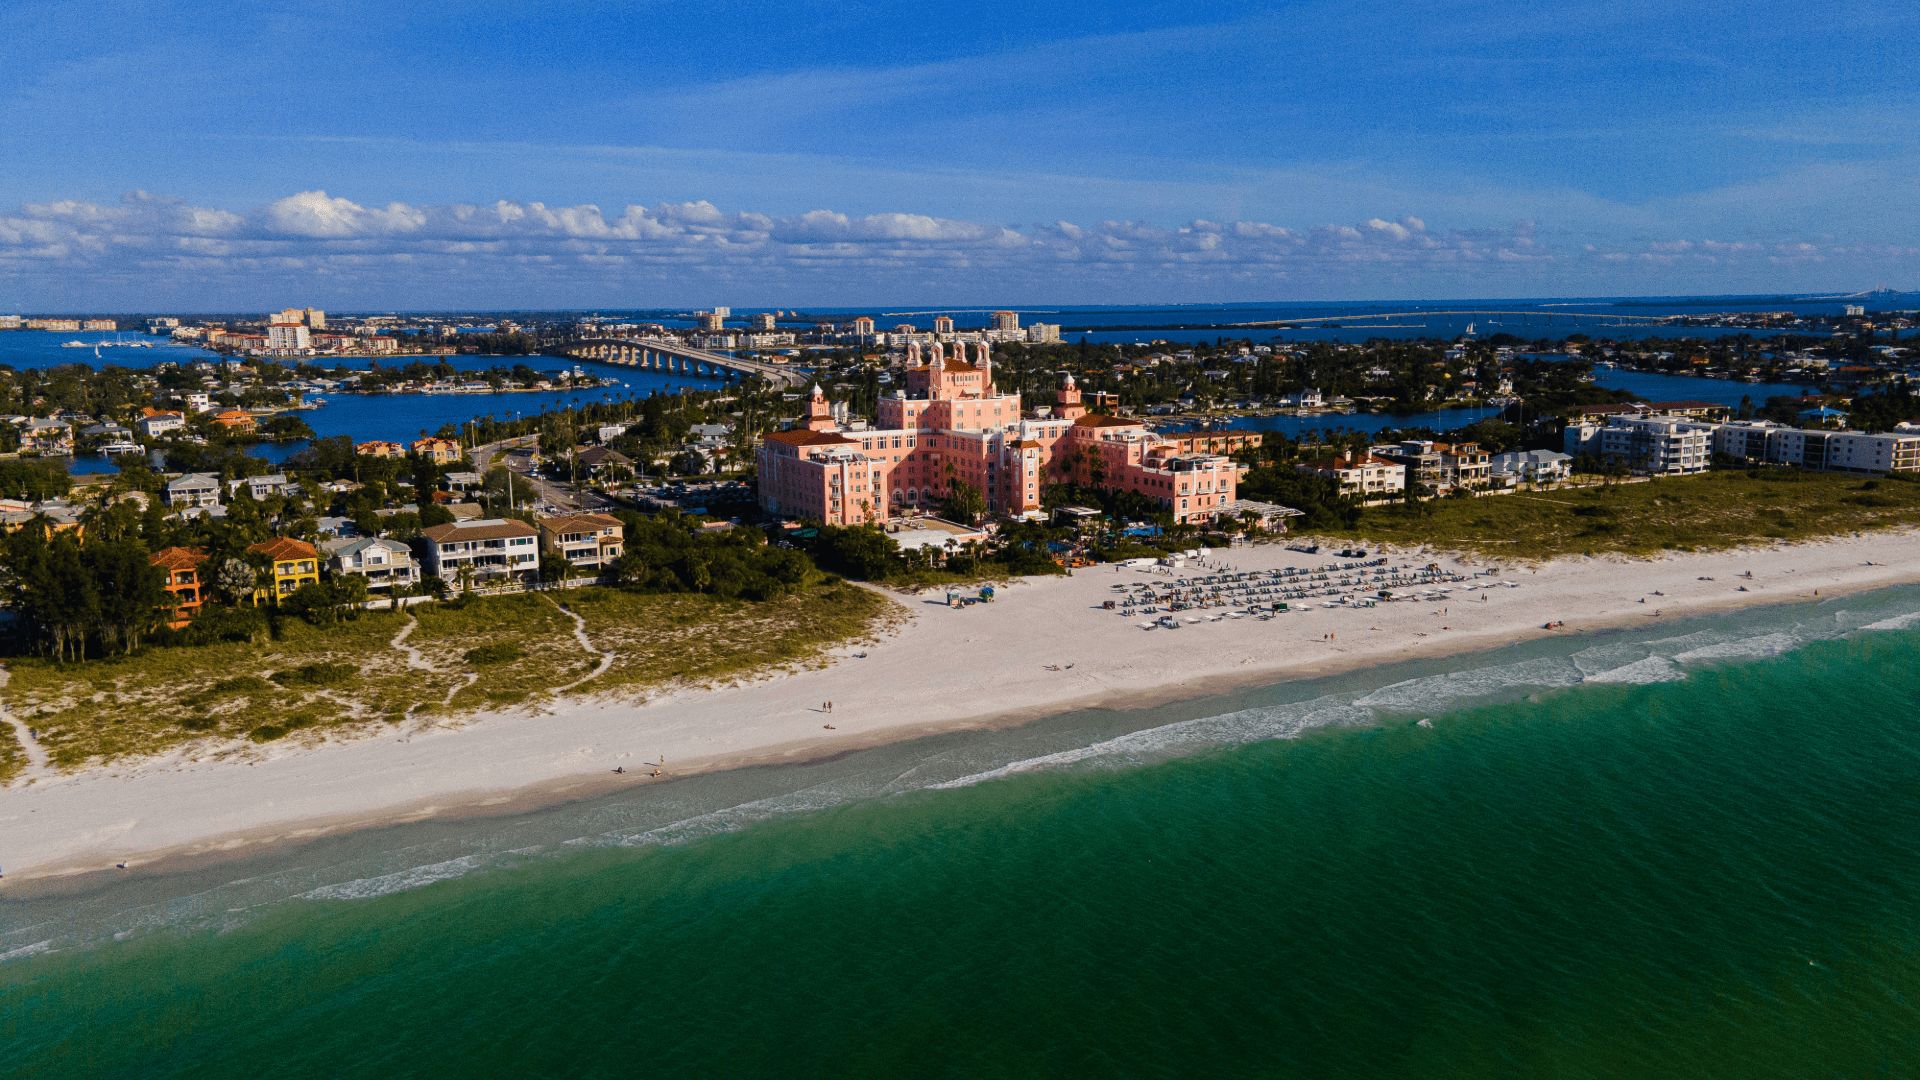 Soles Exterminating Offers Pest Control in St. Pete Beach , FL. Here you can see the Don Cesar Hotel in a coastline view